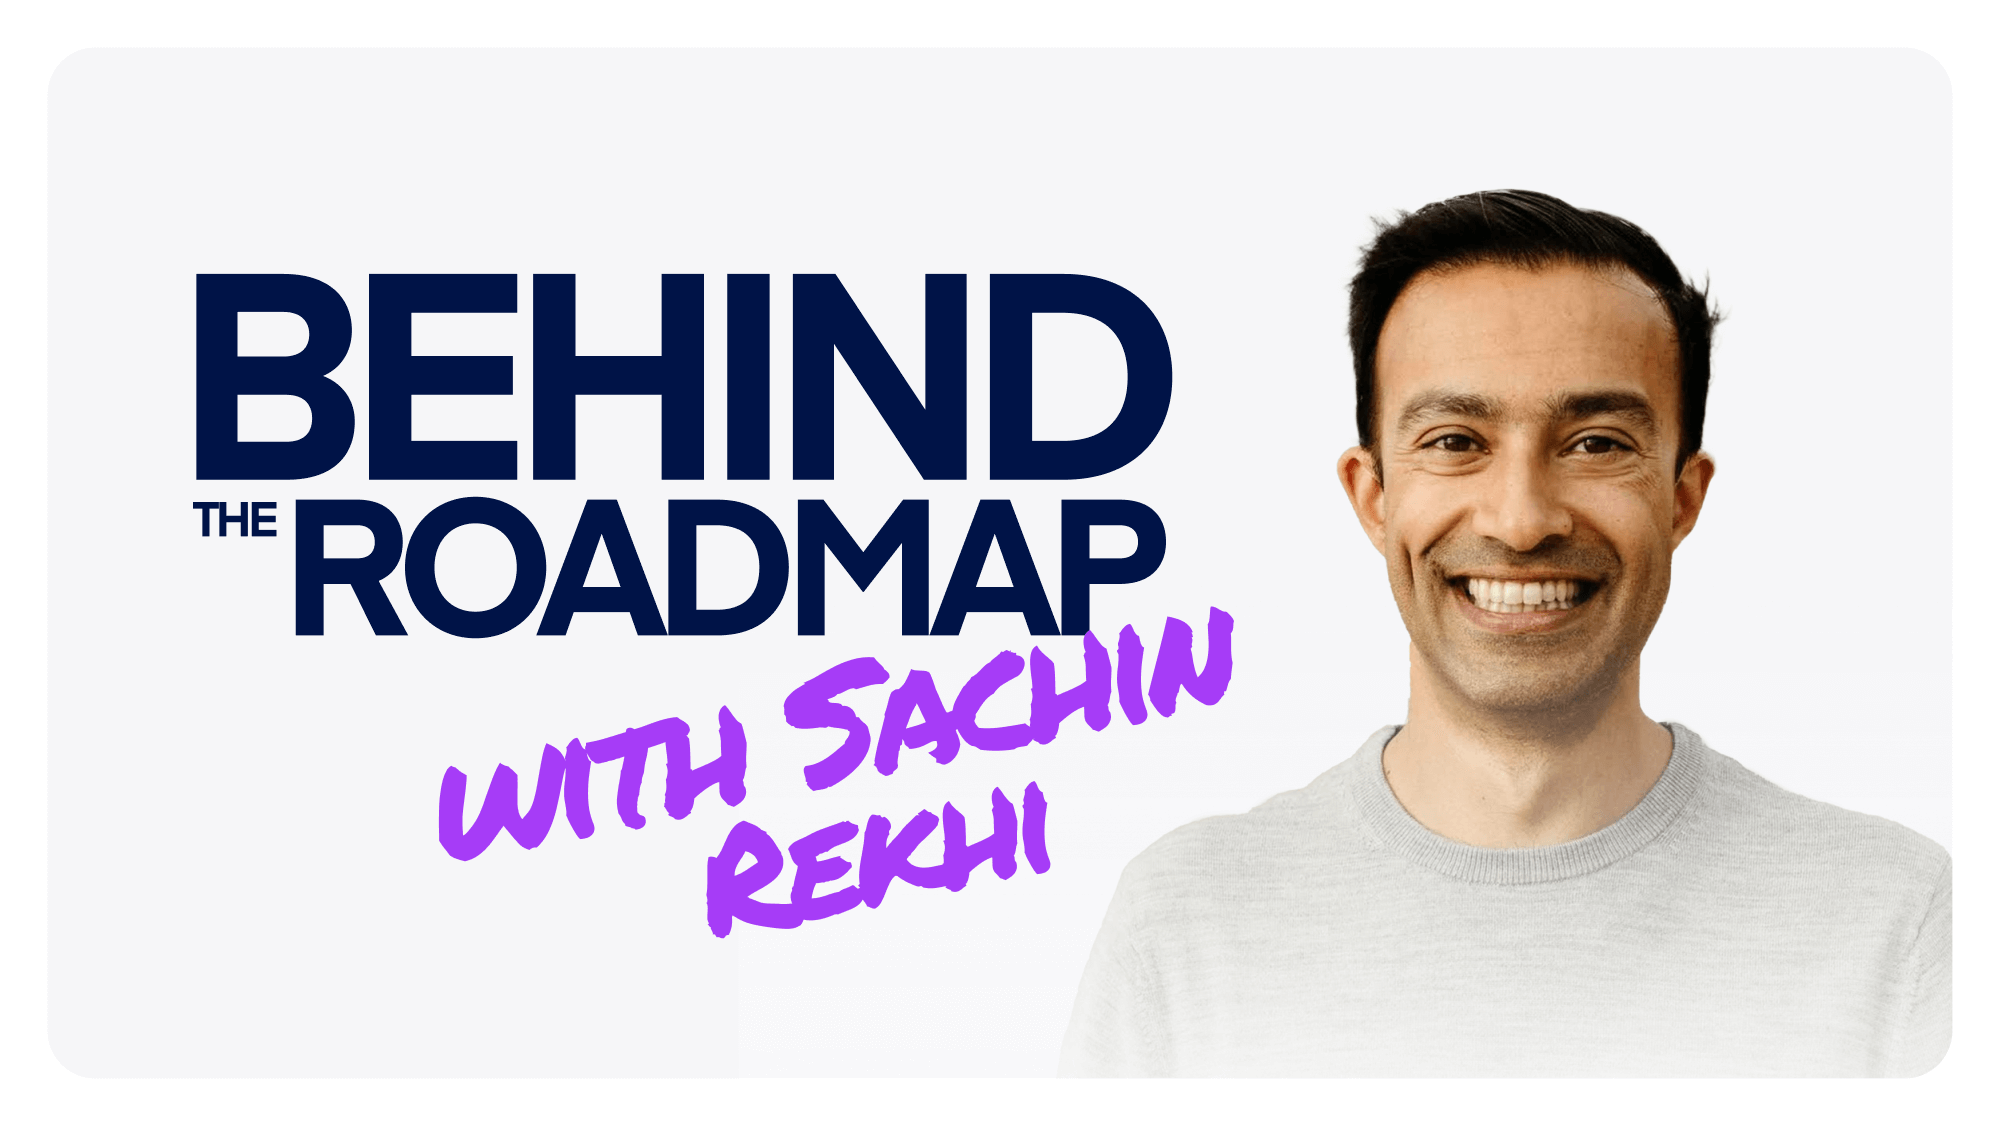 Behind the Roadmap with Sachin Rekhi